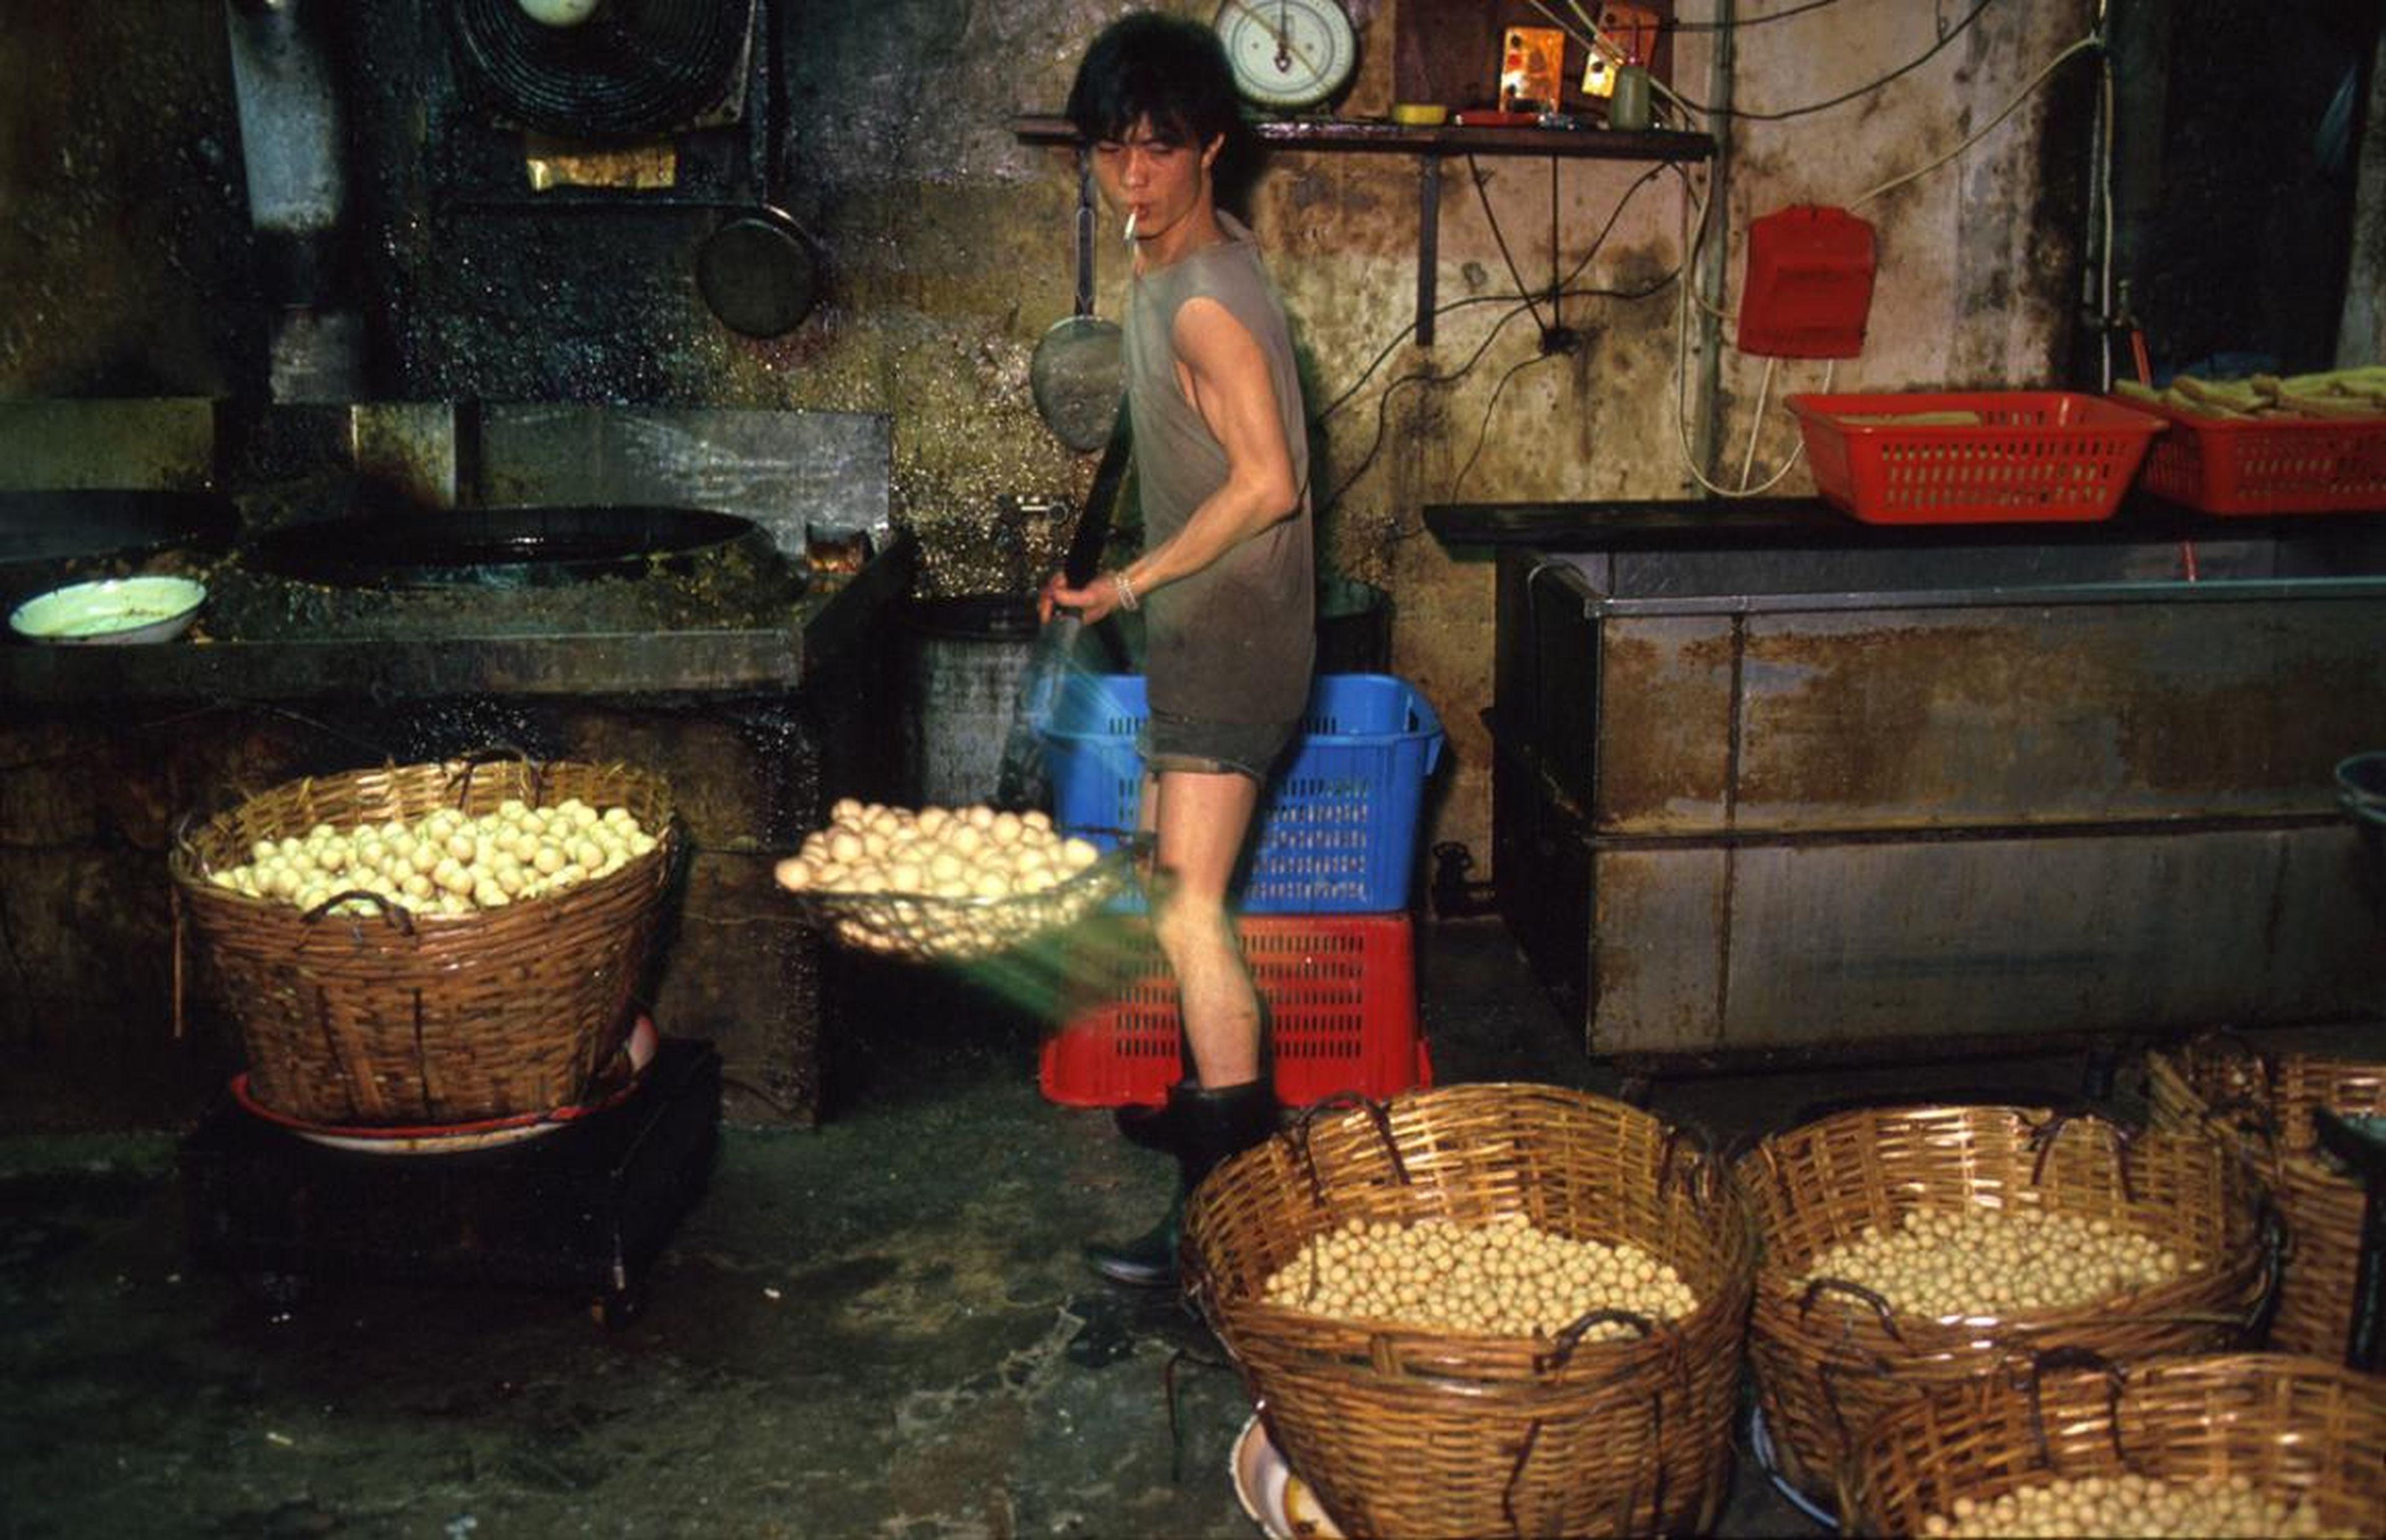 Kowloon was a major manufacturing center for many businesses in Hong Kong. One of its biggest products was fishballs, which were sold to restaurants around the city.